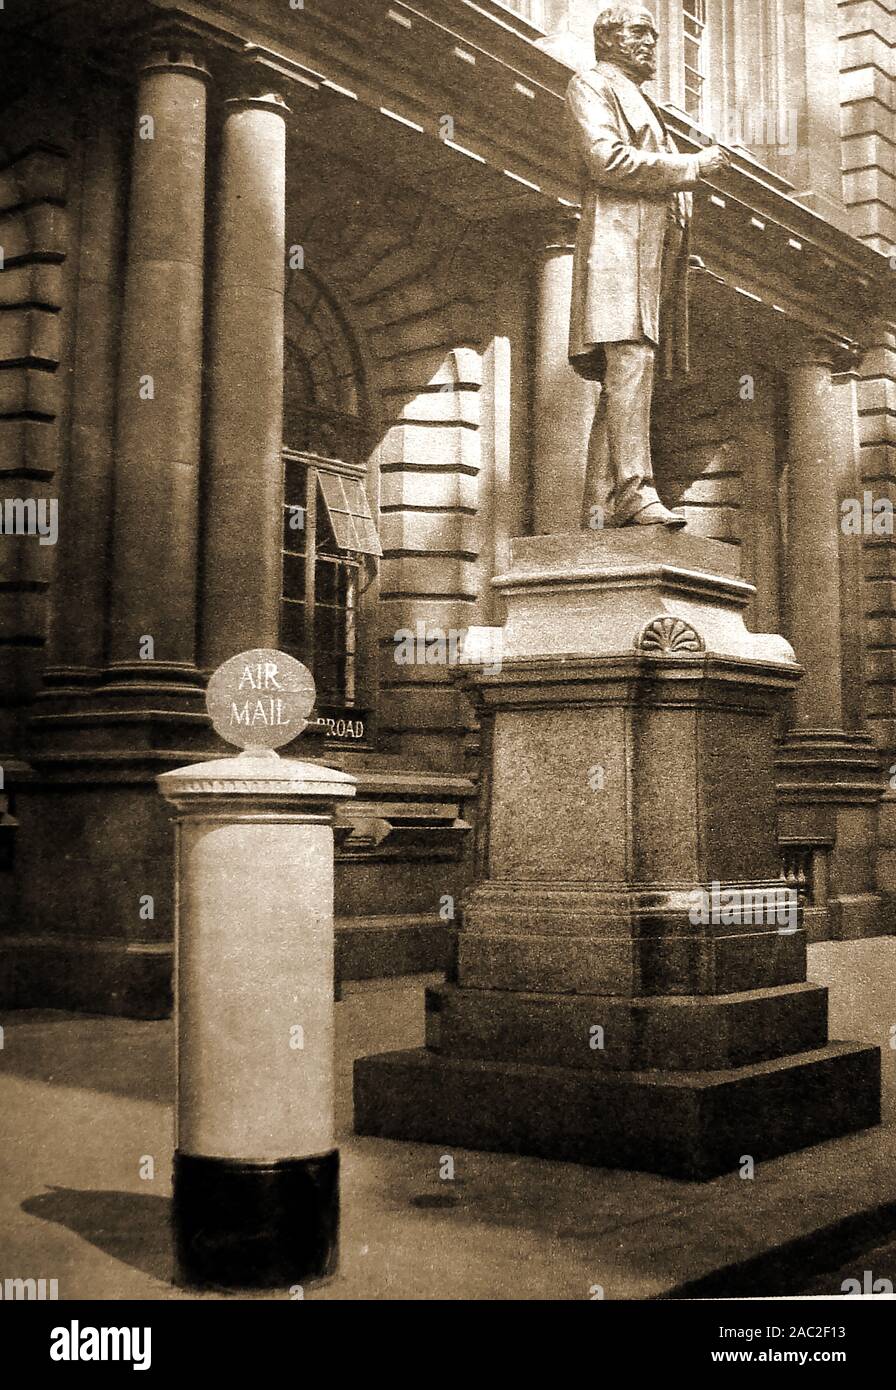 A 1934 historic photograph showing the statue of Rowland Hill  (1795-1879) outside the GPO  (General Post Office) London, UK with a blue dedicated airmail postbox next to it Stock Photo